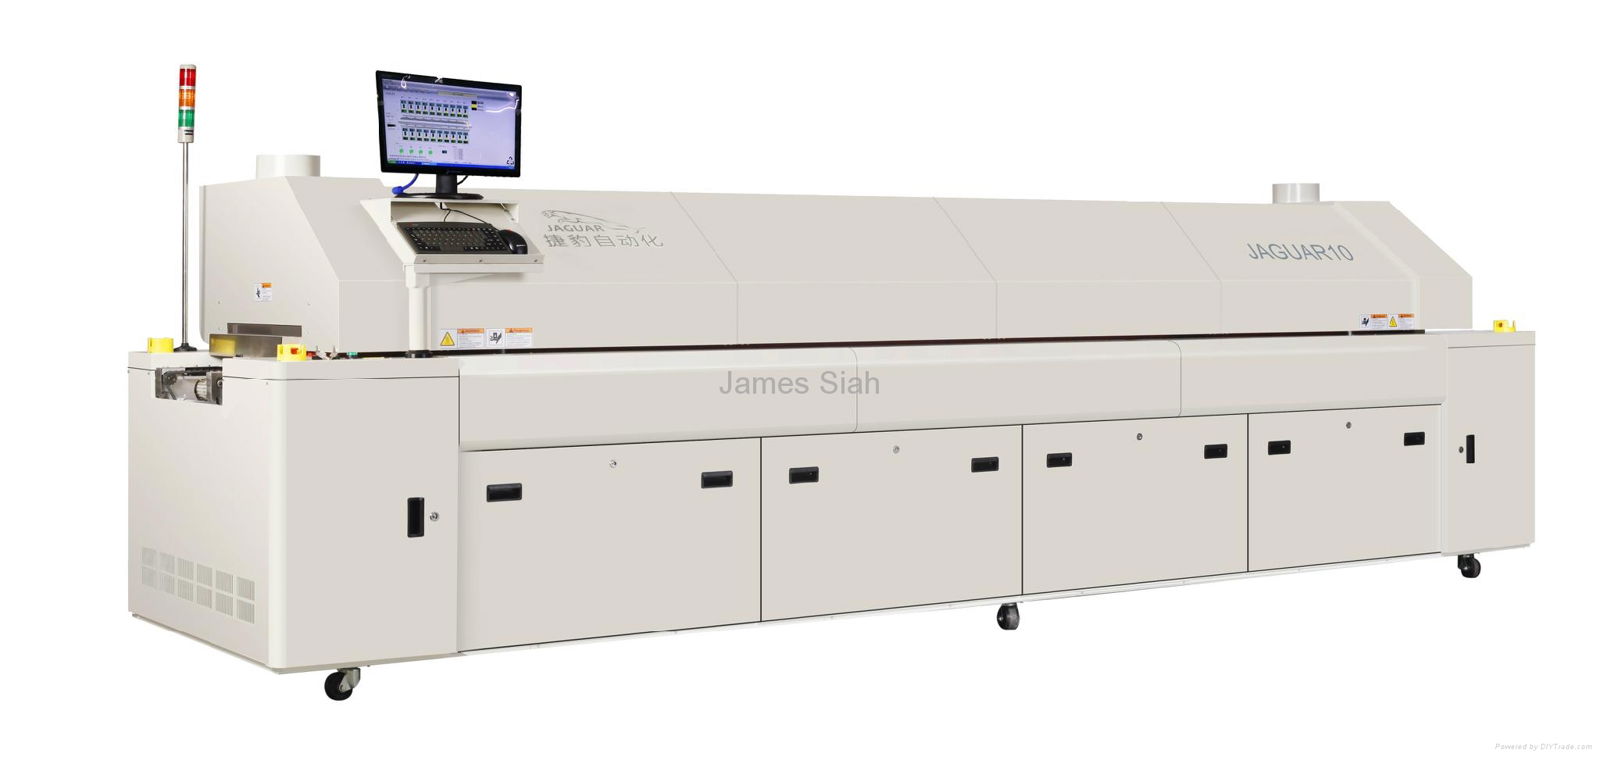 New Reflow Oven with Center Support for PCBA (R10)